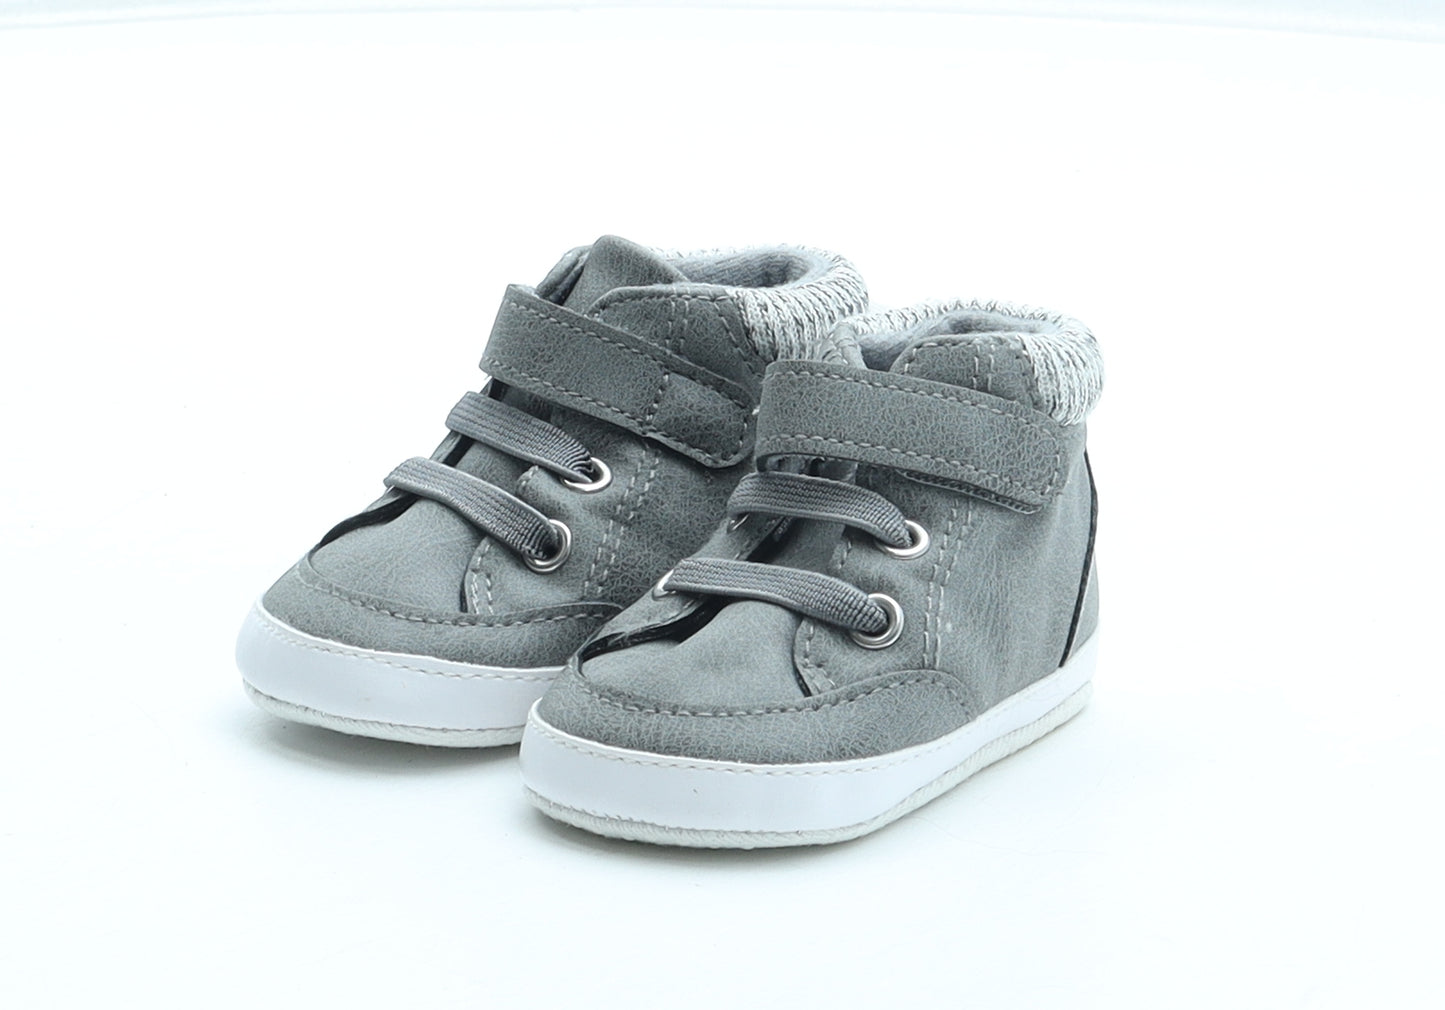 F&F Boys Grey Polyester Sneaker Trainer UK 0-6 Months